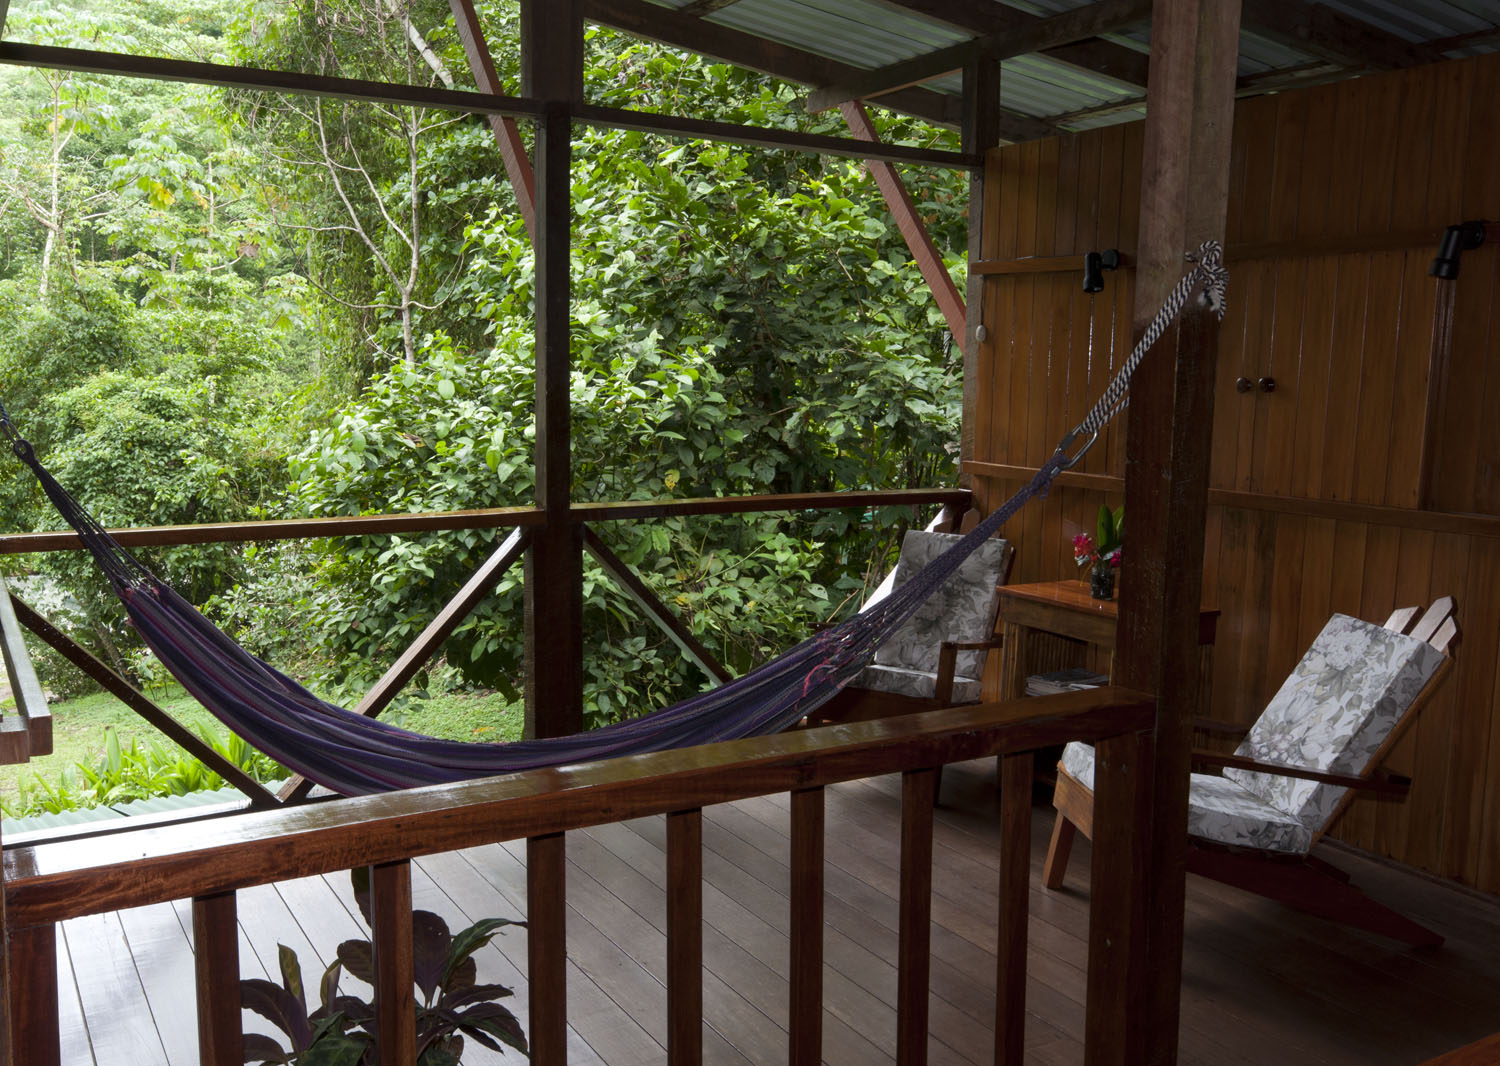 There are additional sitting areas on the second floor of the lodge, which provides great views of the forest